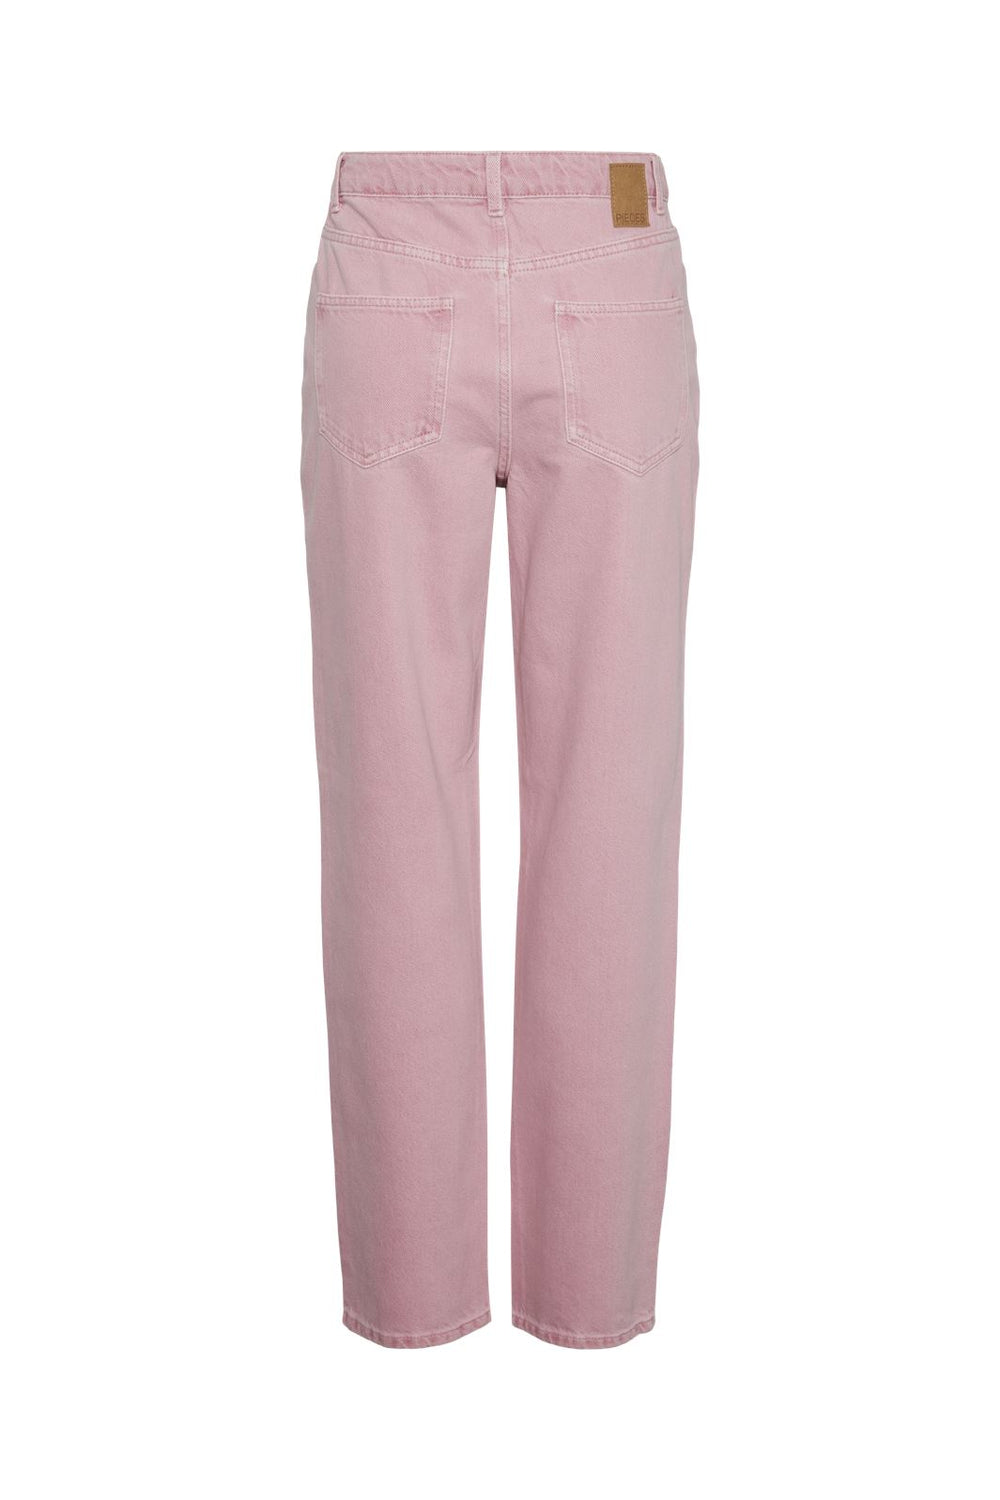 Pieces - Pcfria Straight Denim Pants - 4584190 Candy Pink Washed